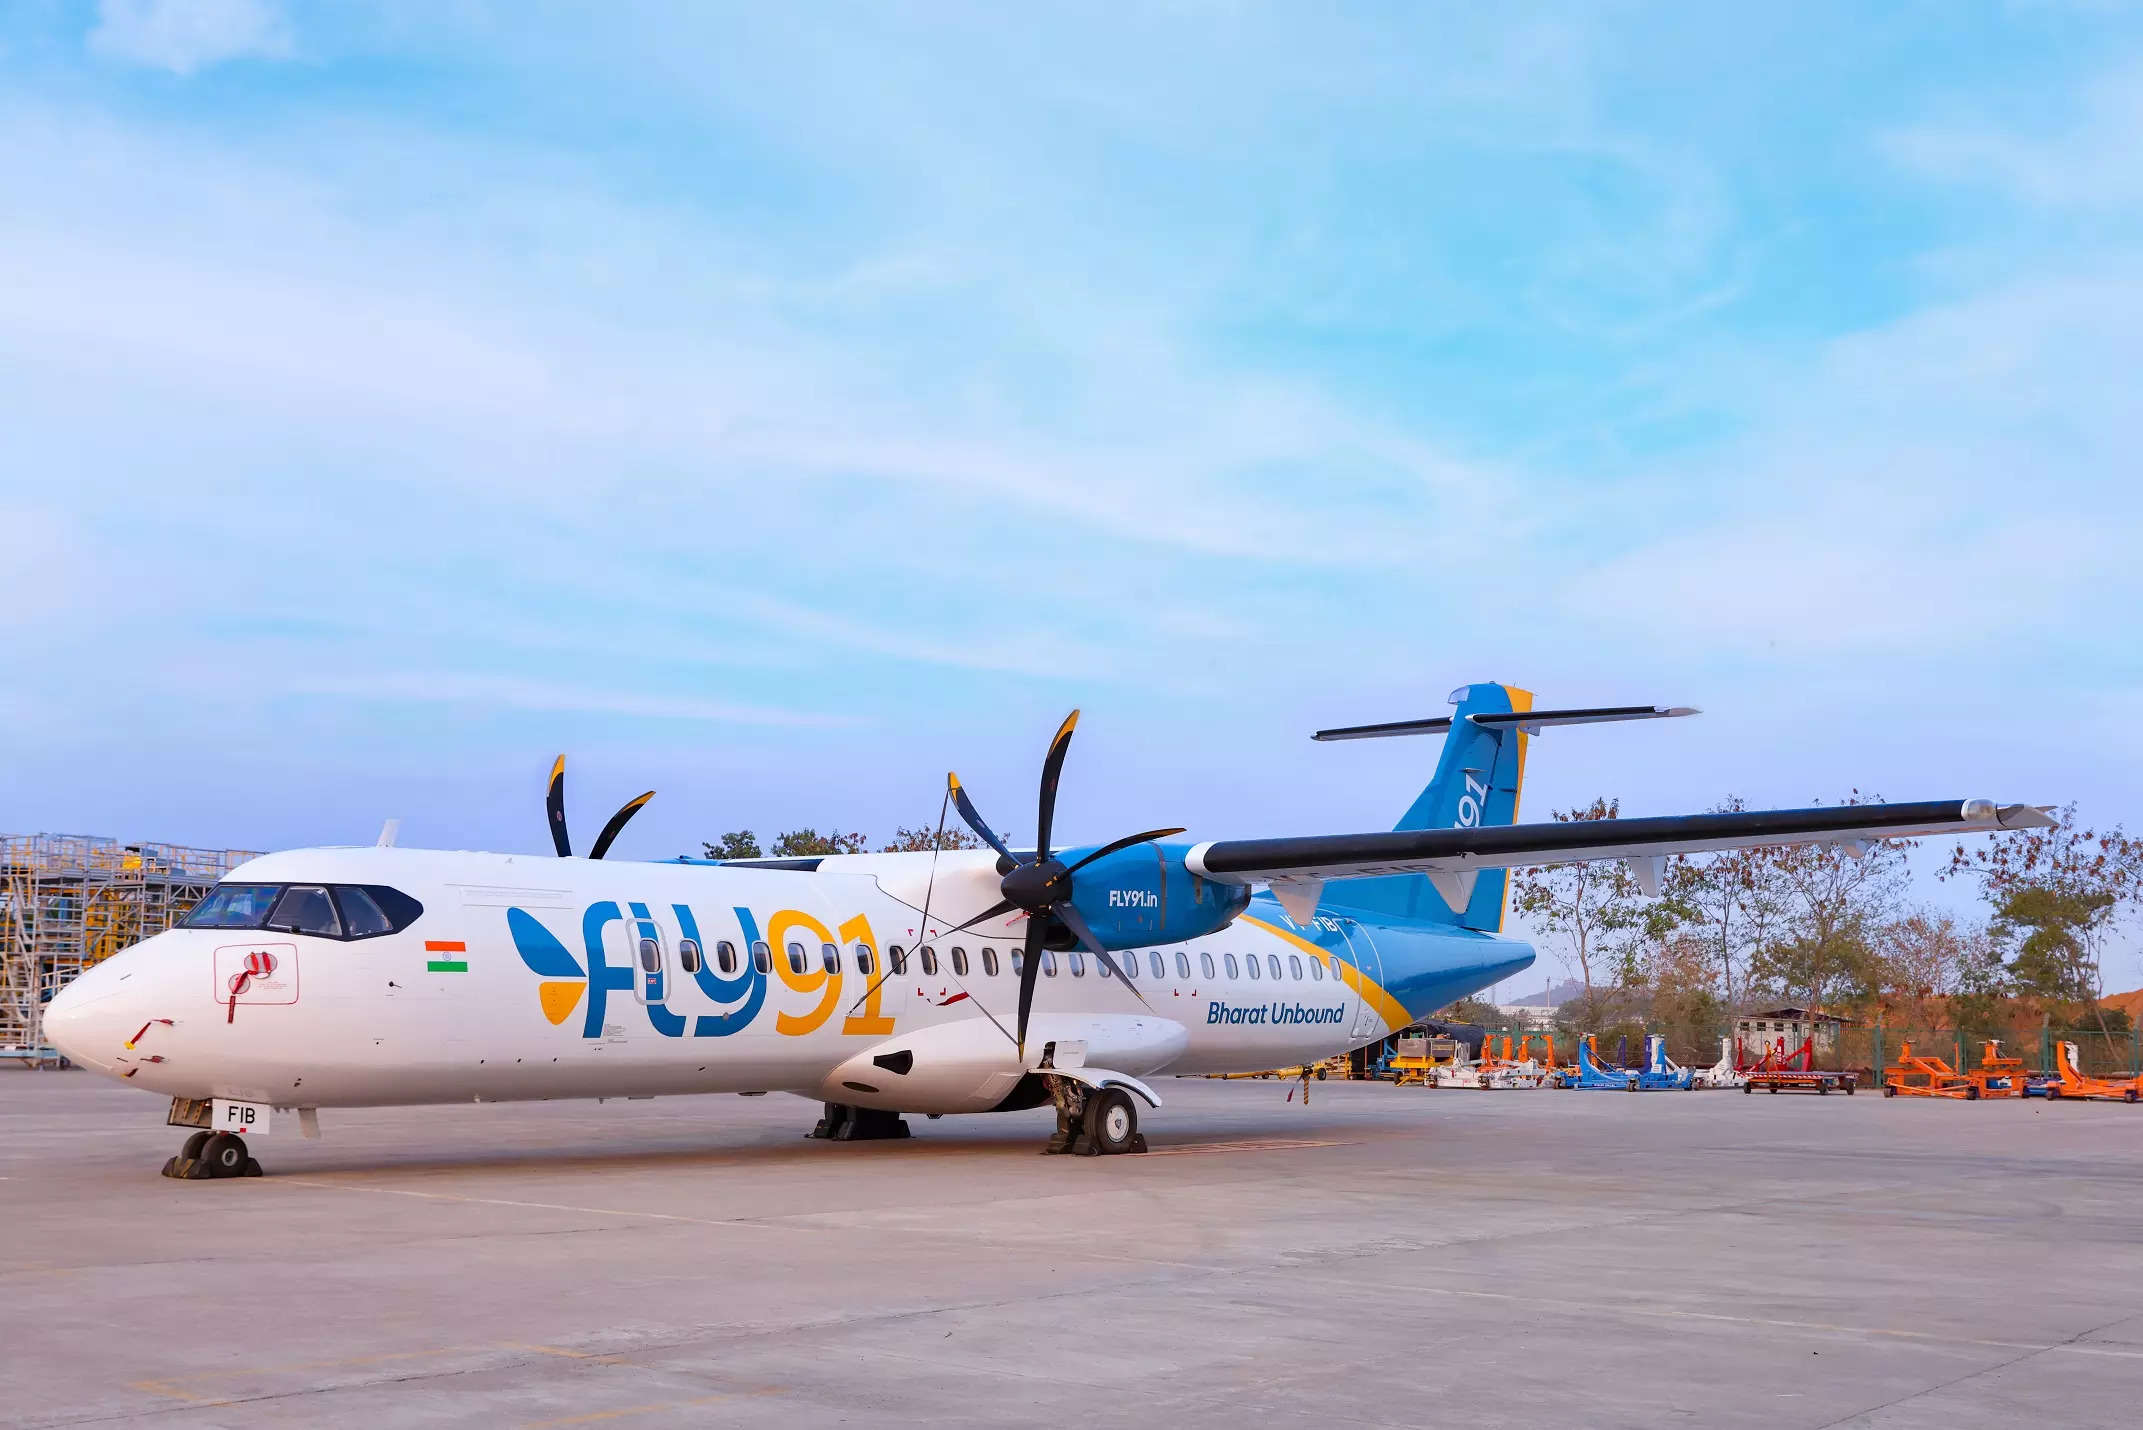 FLY91 expands network with Agatti and Jalgaon routes